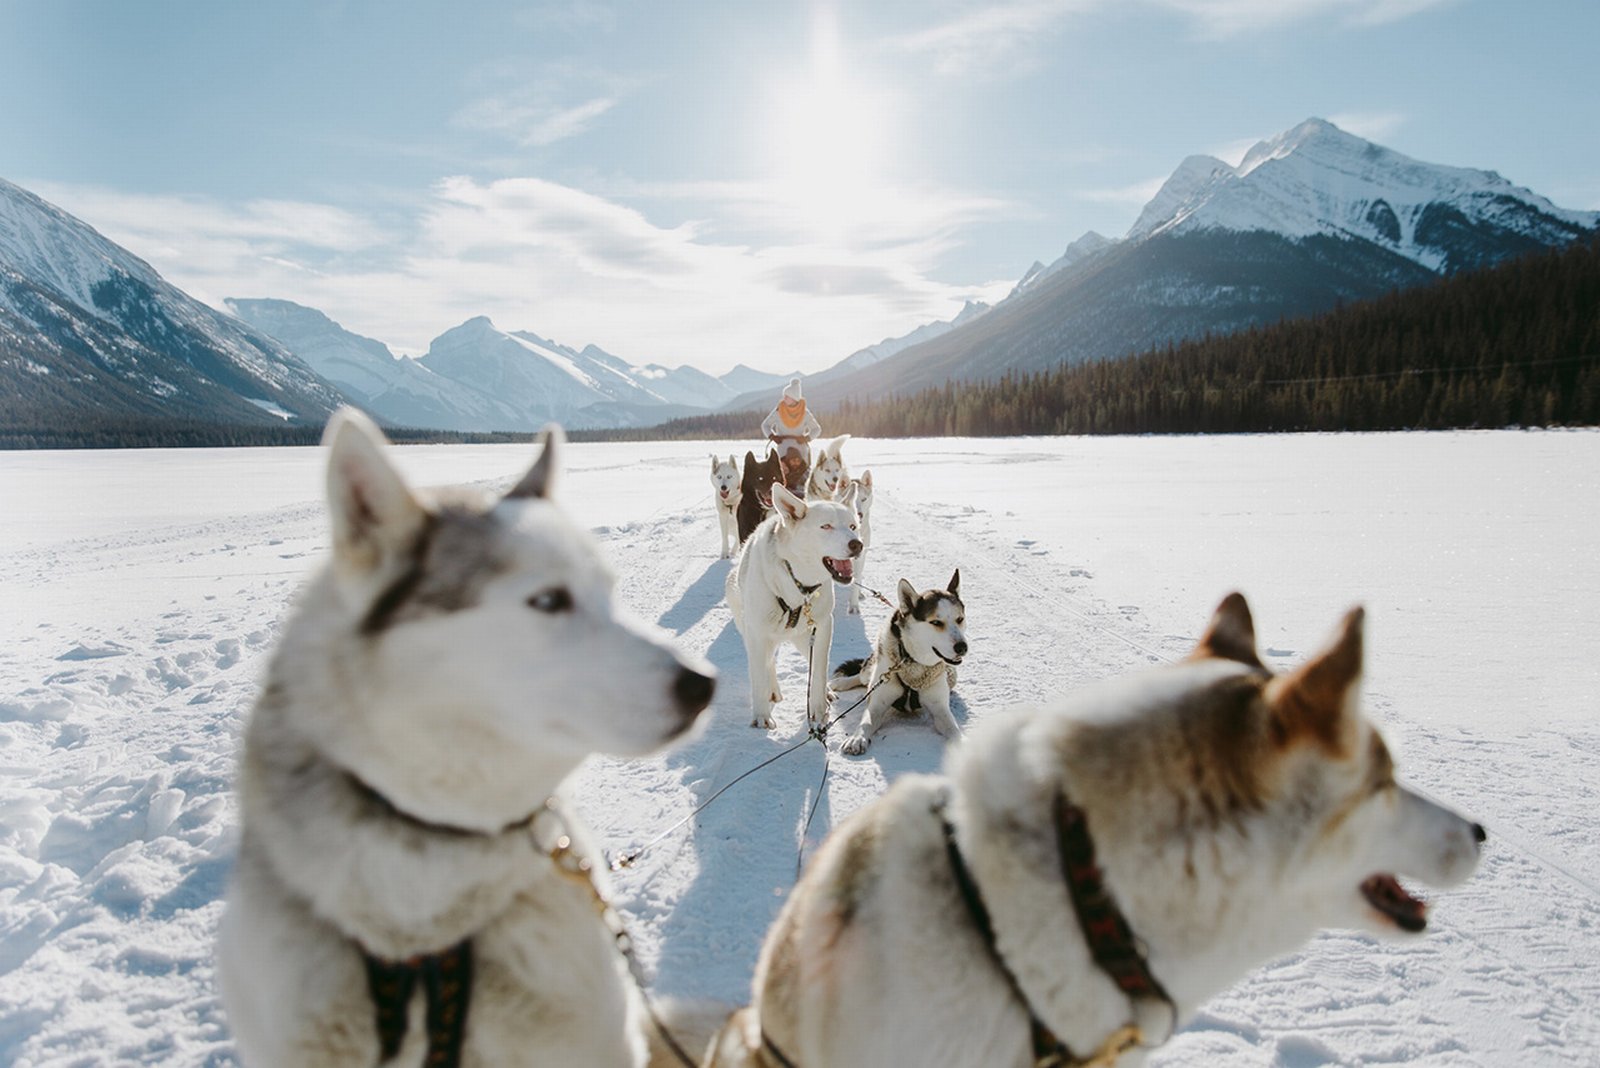 Group of visitors dogsledding with Snowy Owl Dogsled Tours in Spray Lakes.